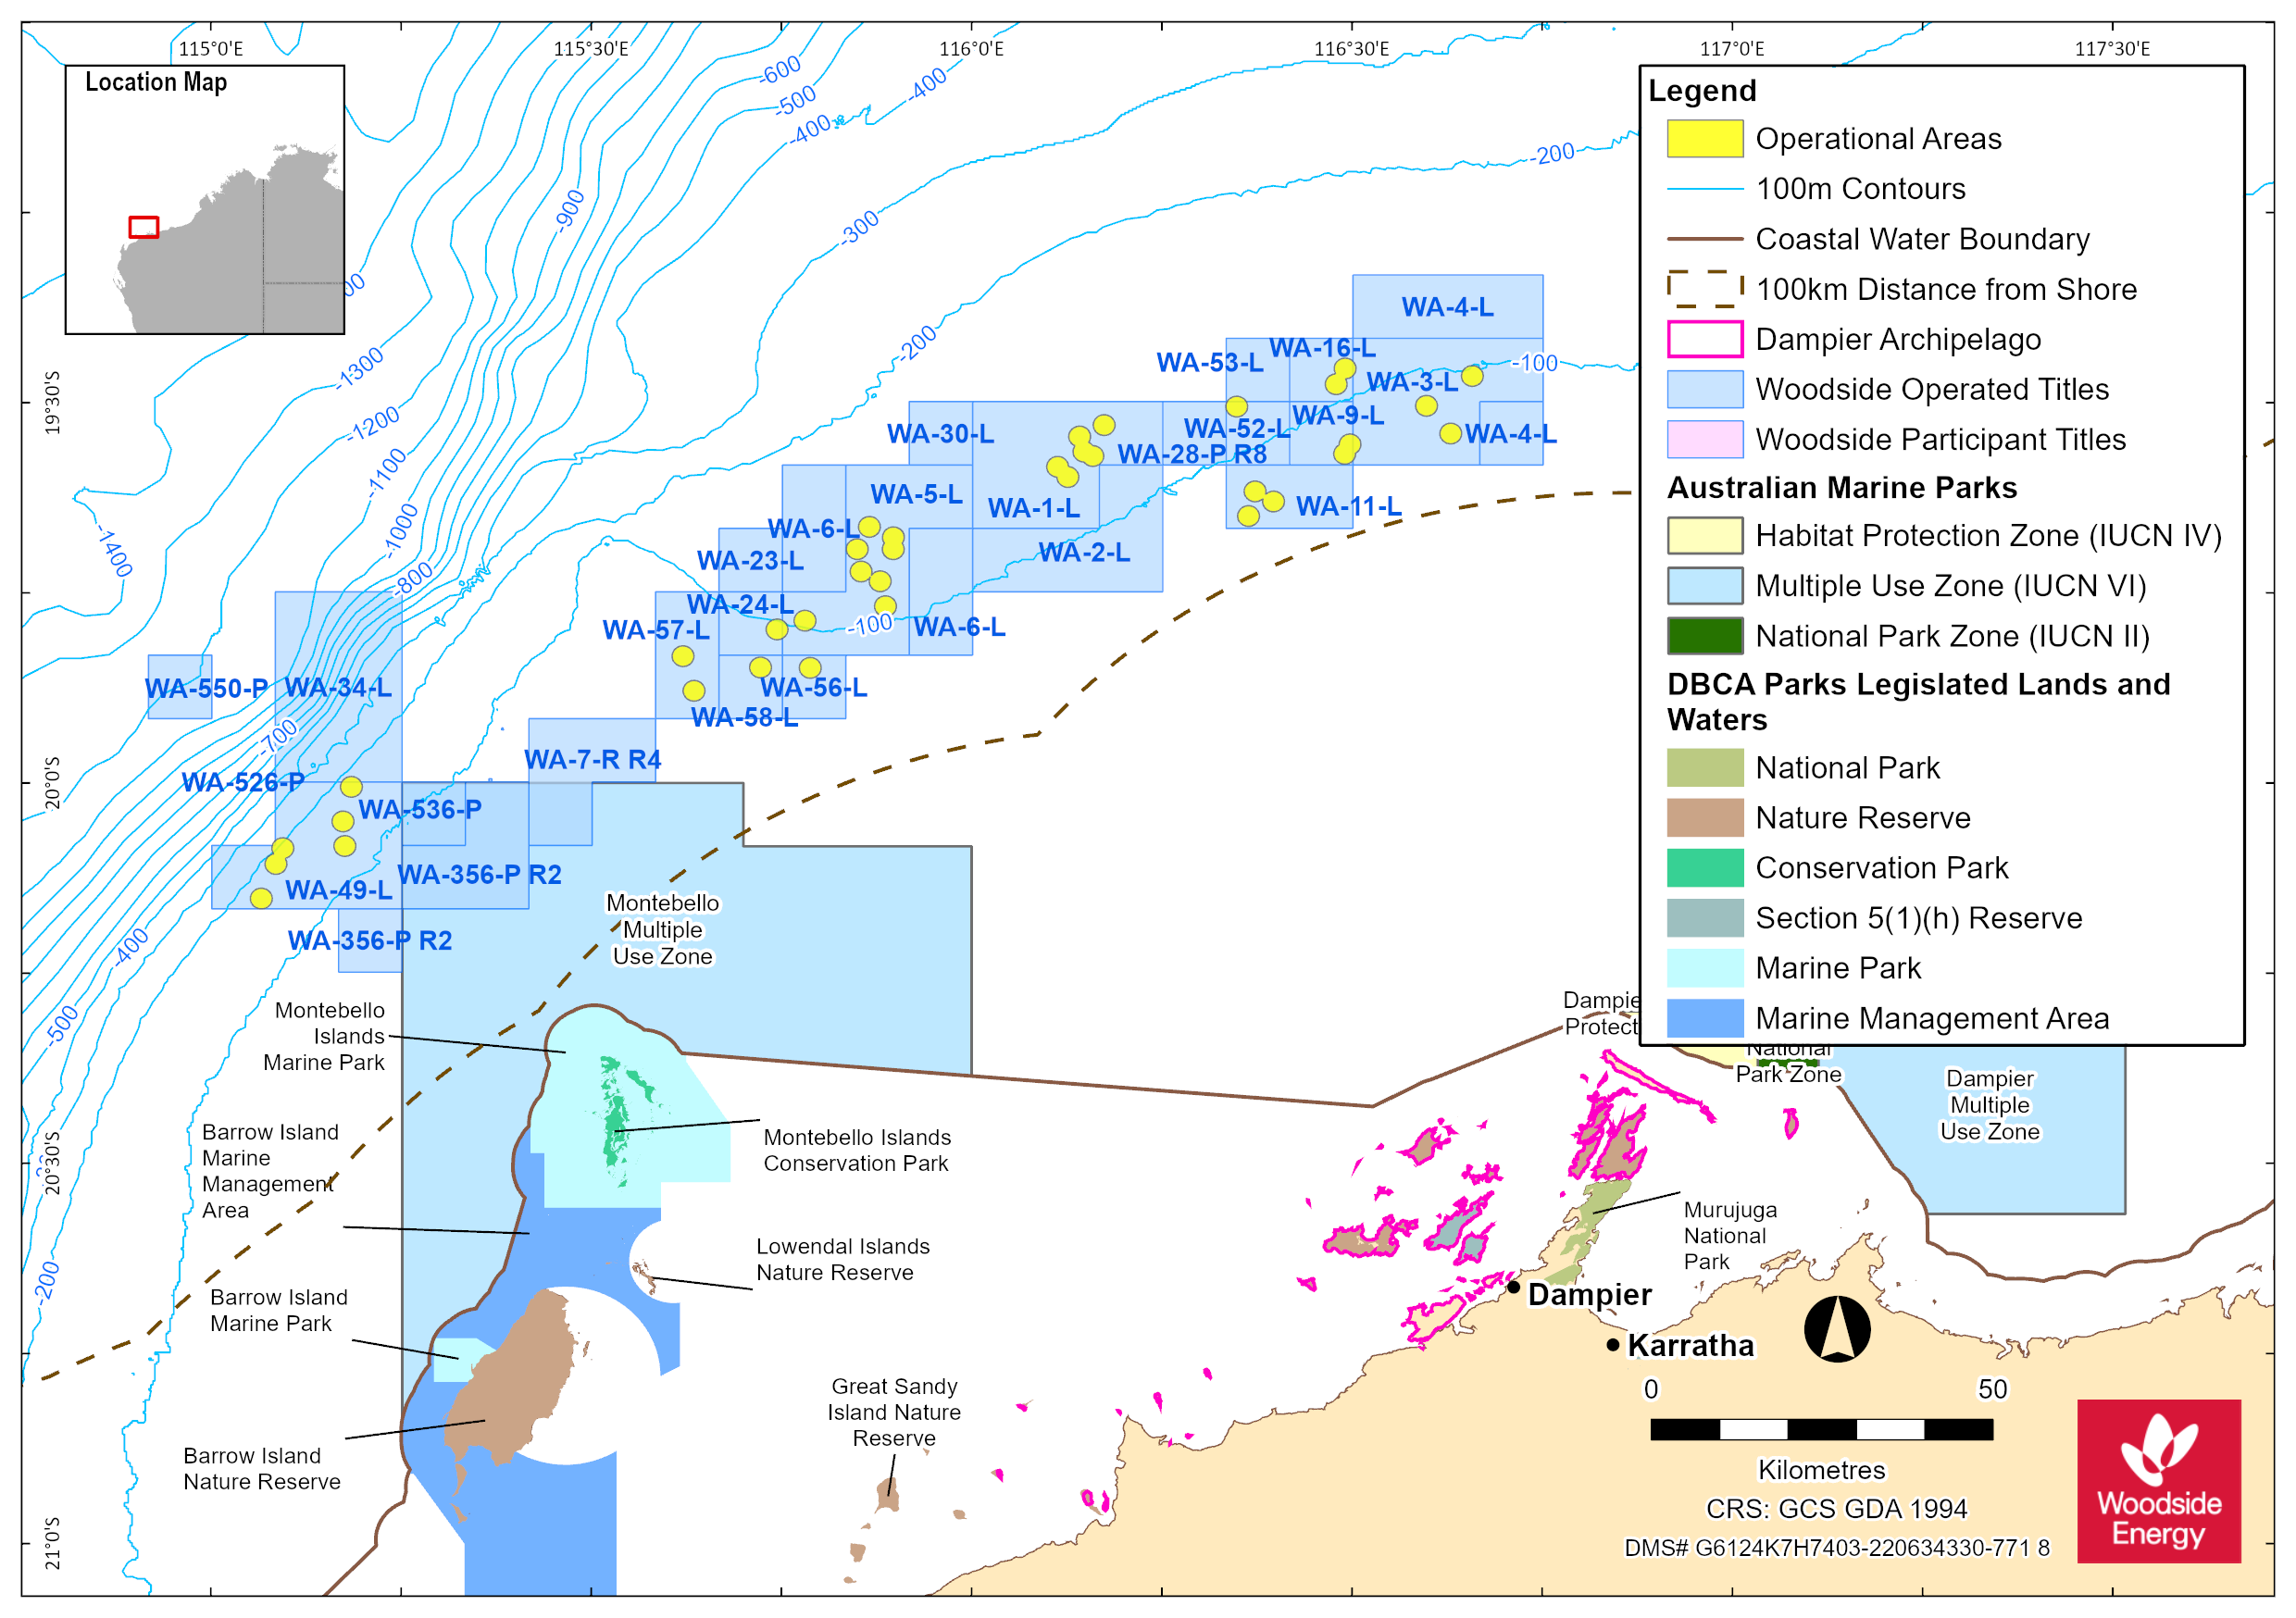 Location map - Activity: NWS and Julimar Exploration Wellhead Decommissioning (refer to description)